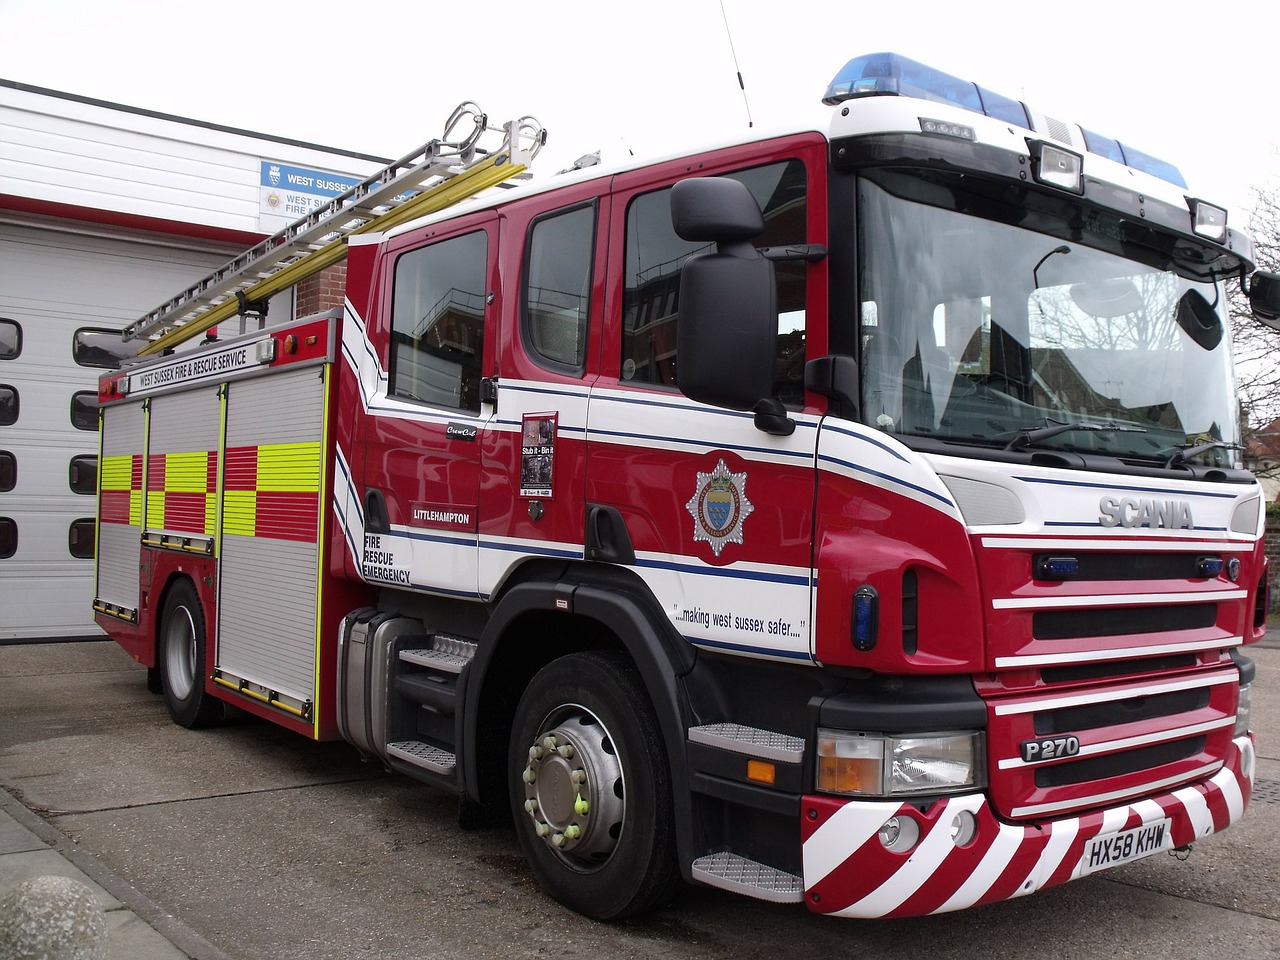 image of a fire engine